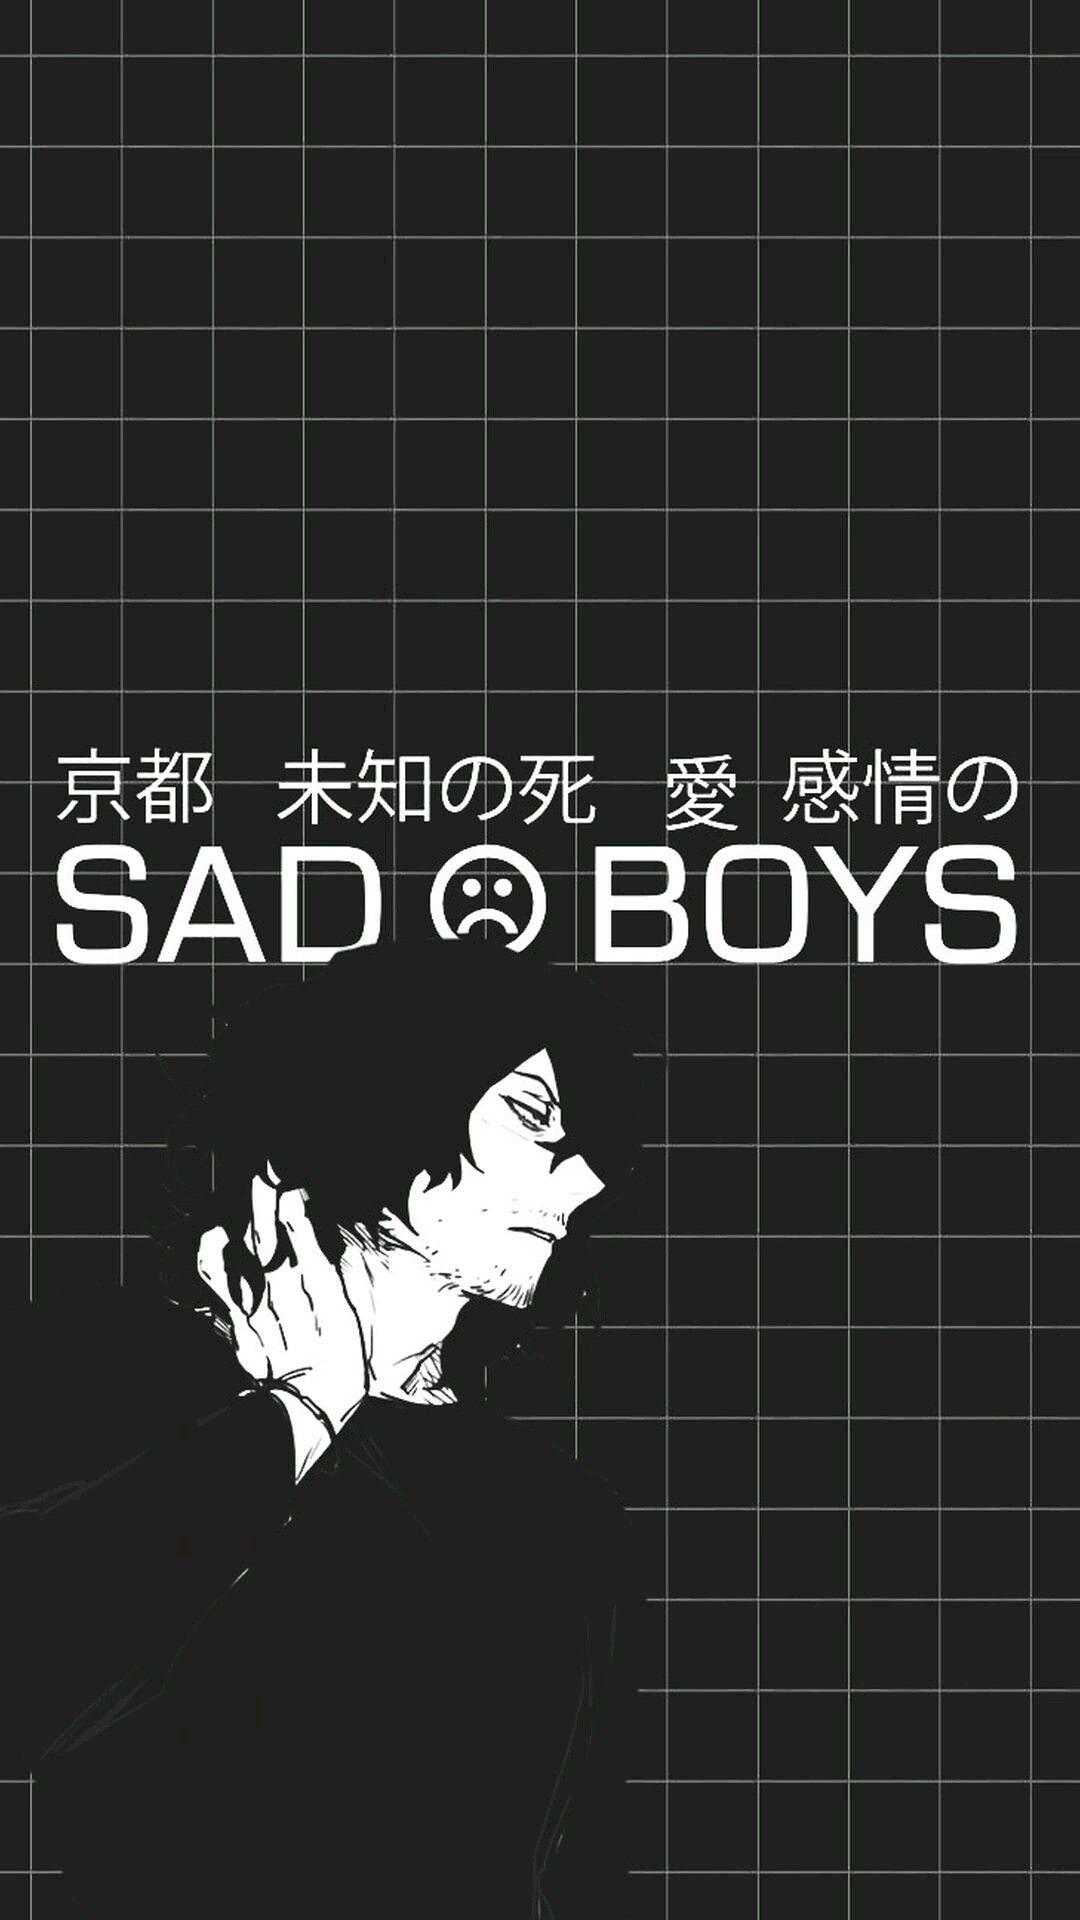 Sad Aesthetic Anime Wallpapers Wallpaper Cave